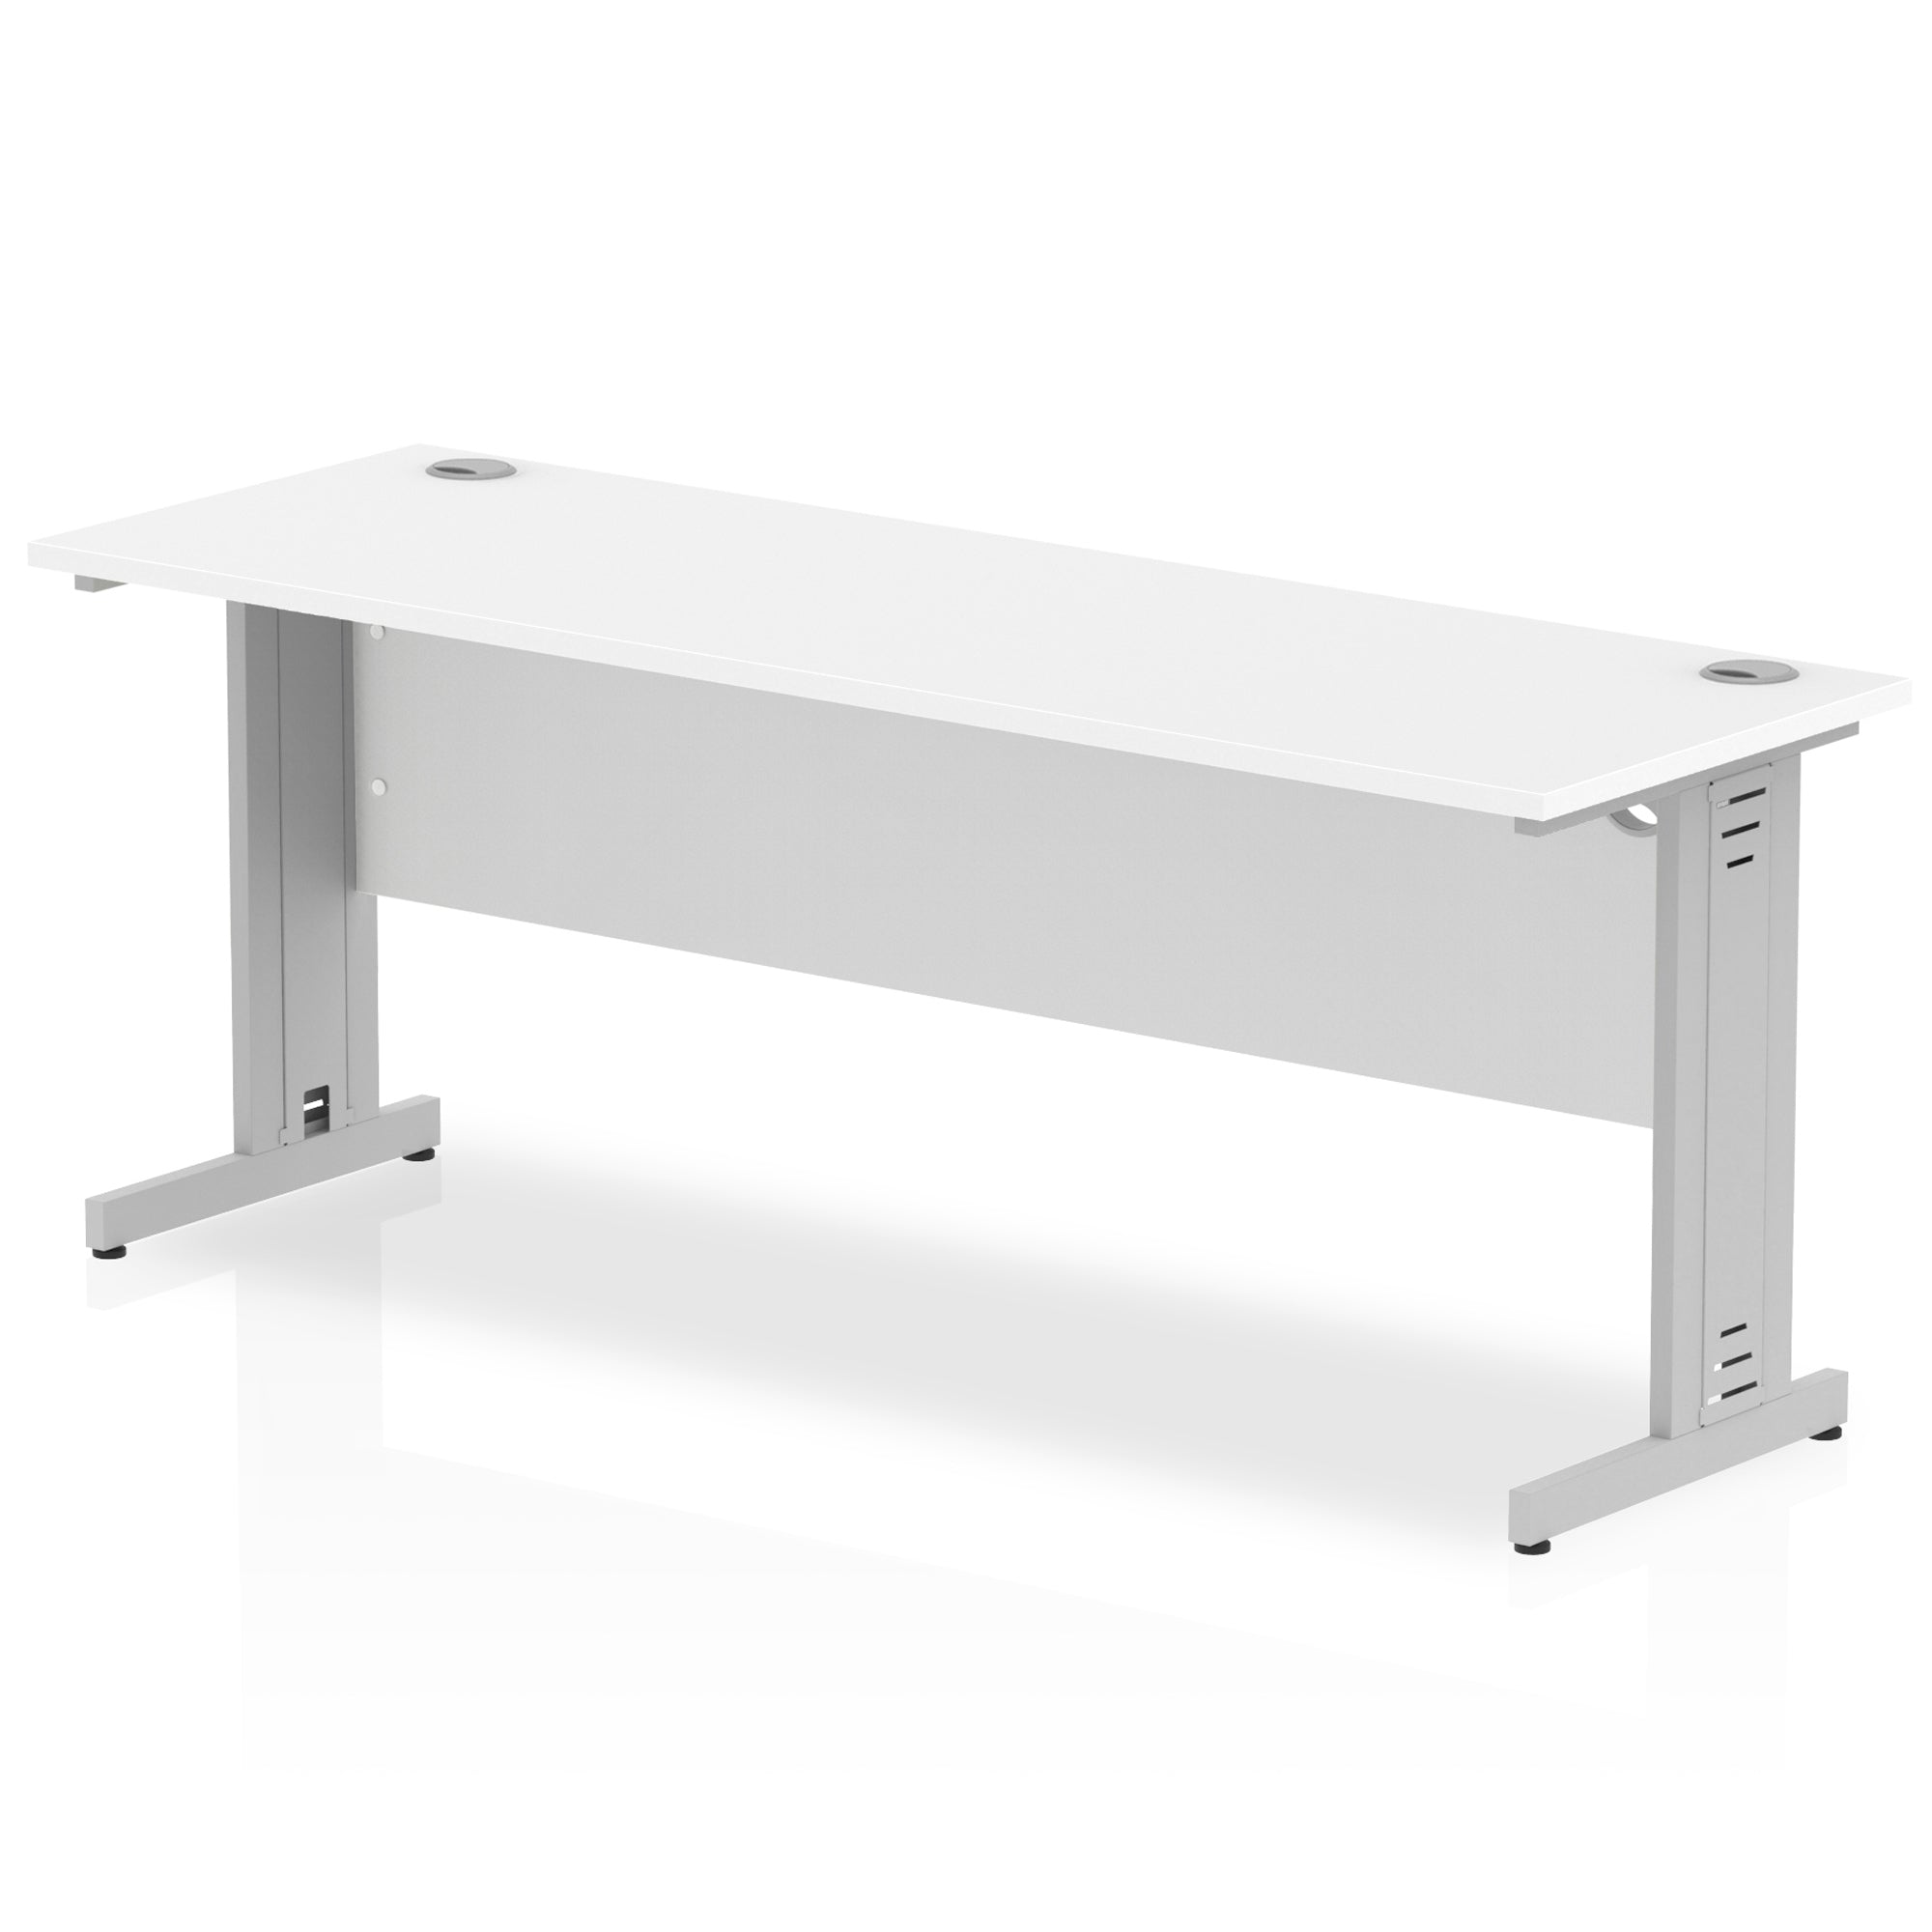 Impulse 1800mm Slimline Desk with Cable Managed Leg - MFC Rectangular Table, Self-Assembly, 5-Year Guarantee, 1800x600, Silver/White Frame